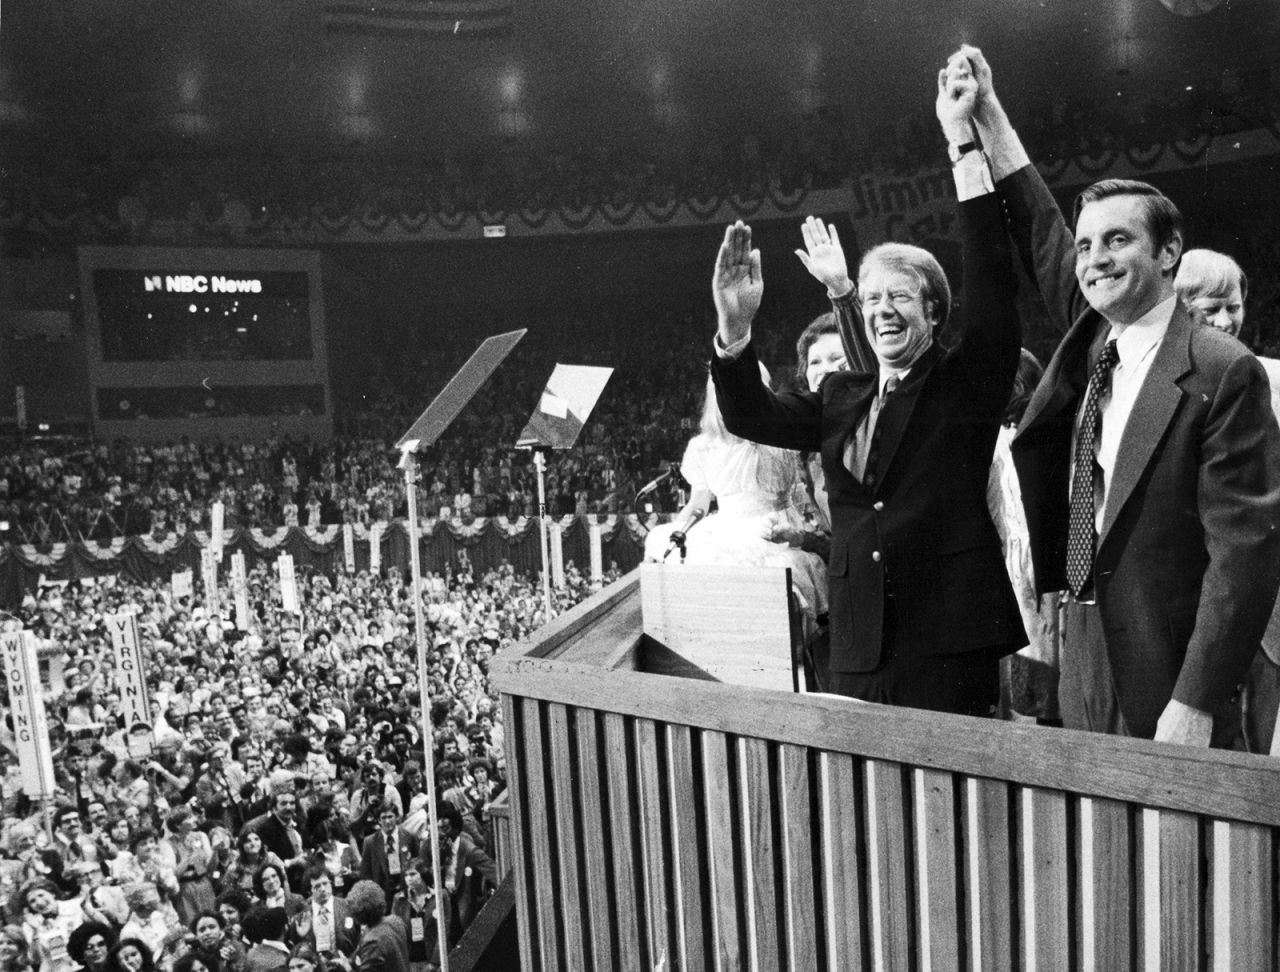 Jimmy Carter and Mondale clasp hands after their acceptance speeches for the Democratic presidential ticket at the Democratic National Convention at Madison Square Garden in Manhattan on July 15, 1976.